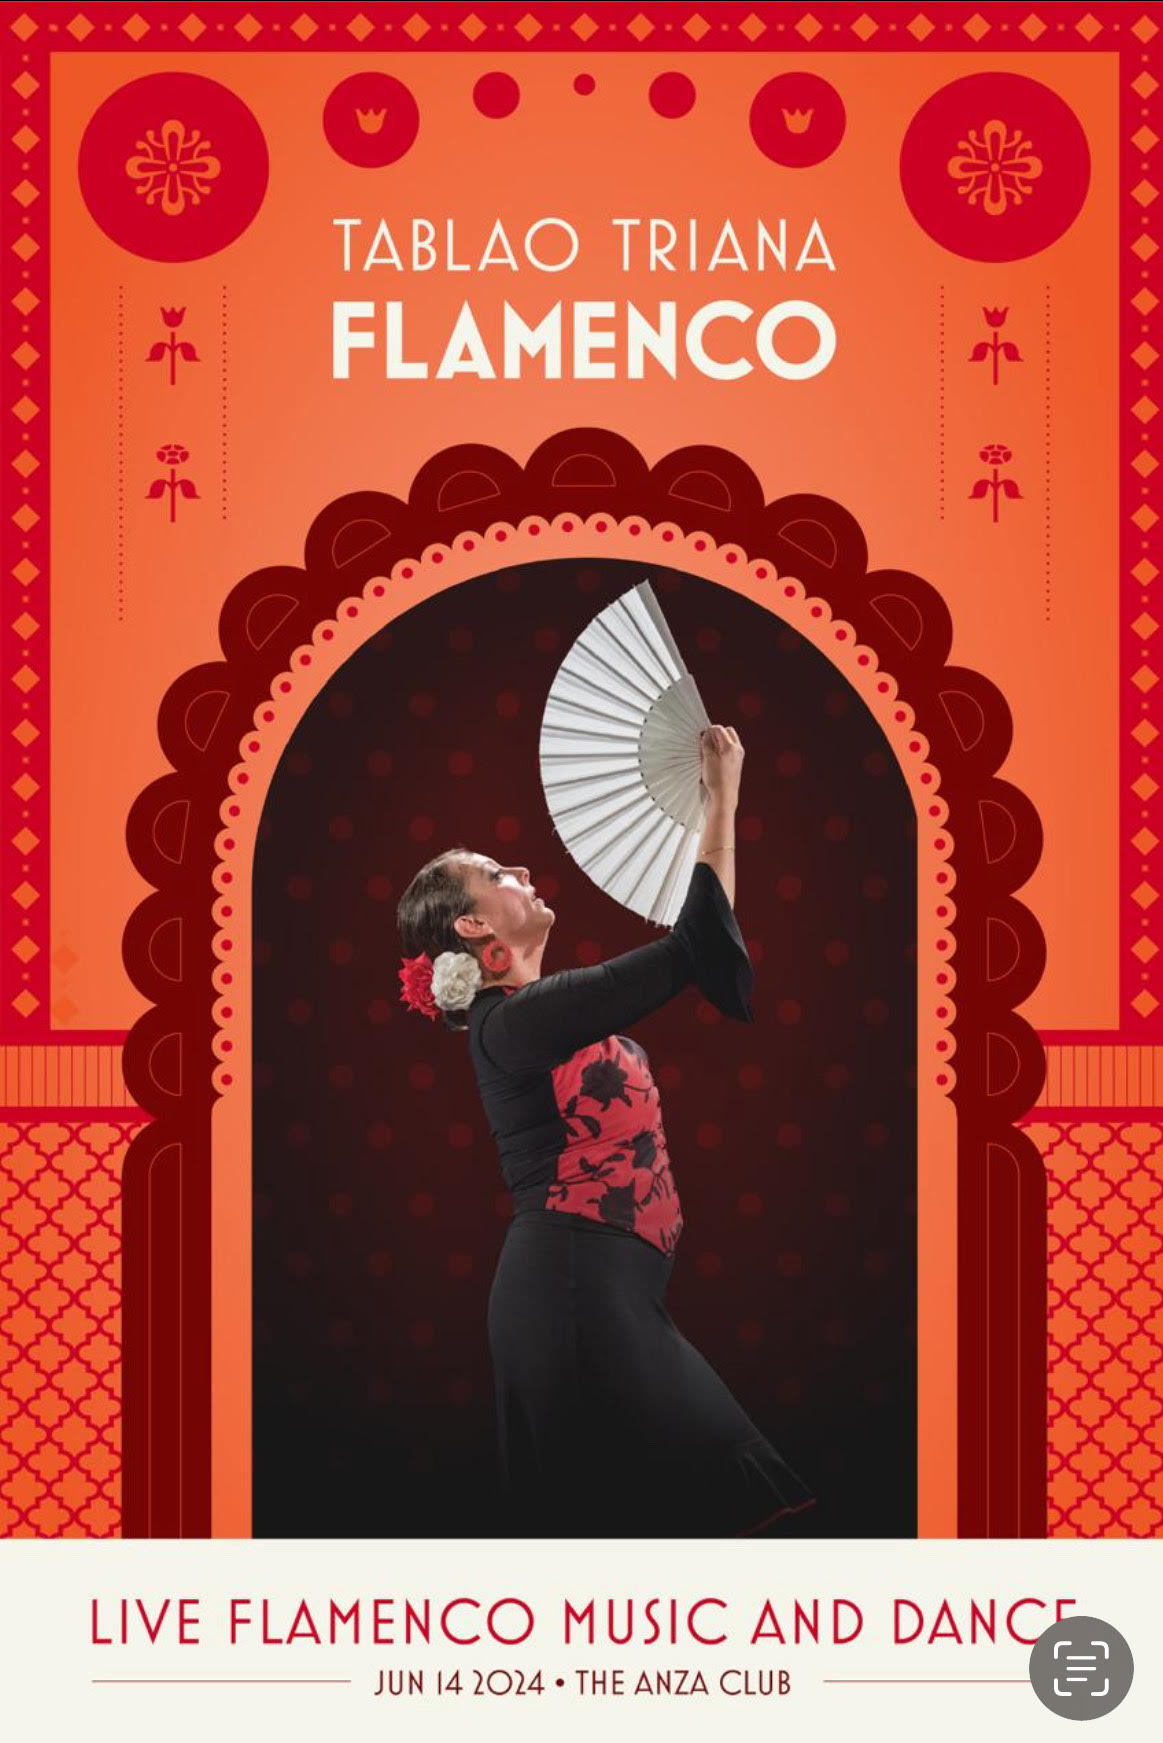 Poster for Tablao Triana Flamenco Live Music and Dance June 2024: a flamenco dance artist poses with a fan surrounded by orange and red graphics